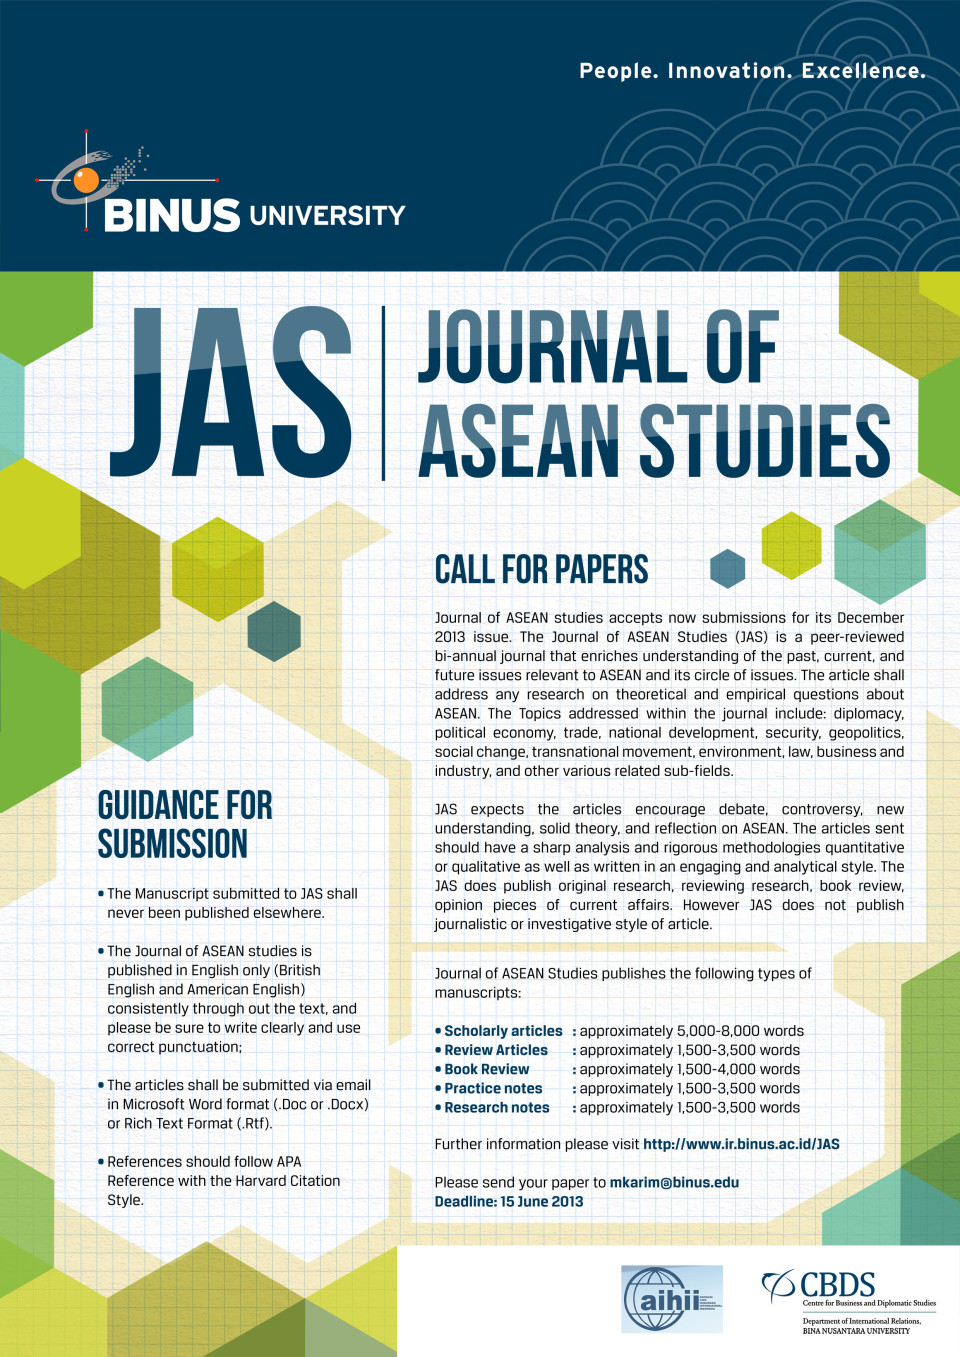 Media research journals call for papers